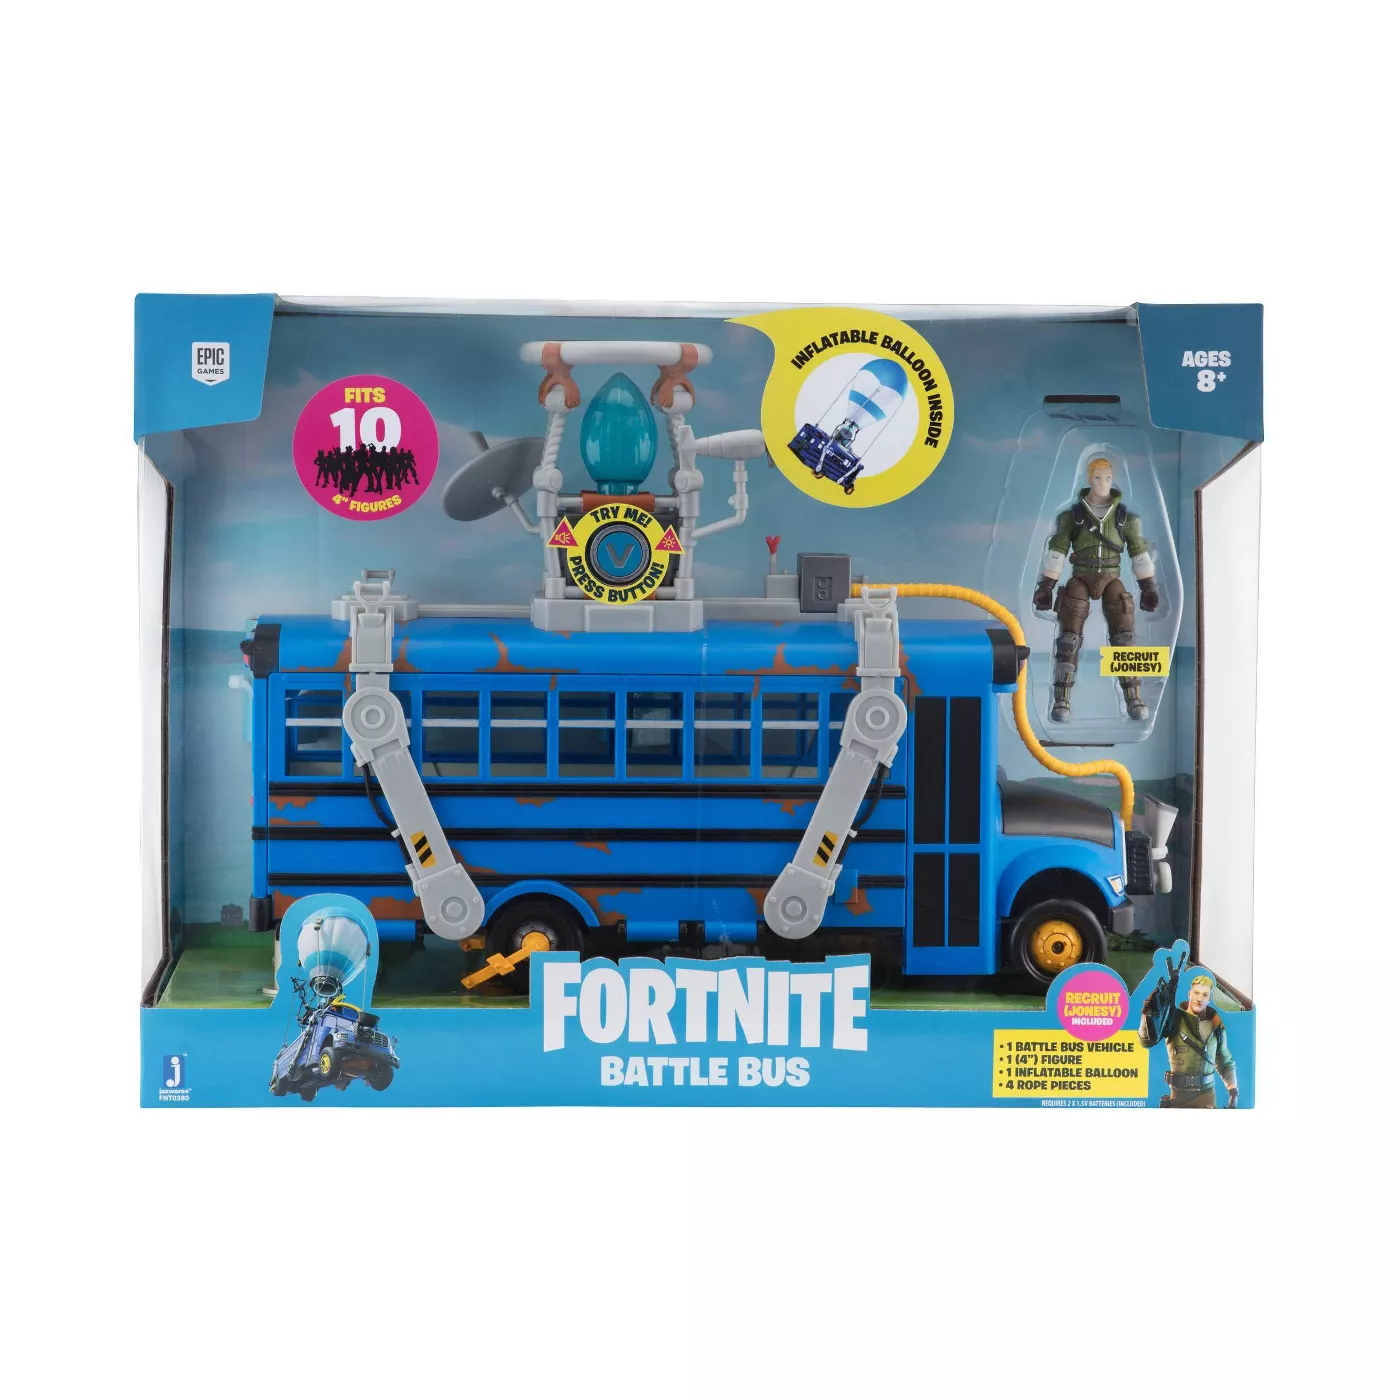 Fortnite Deluxe Battle Bus Vehicle Multicolored for sale online